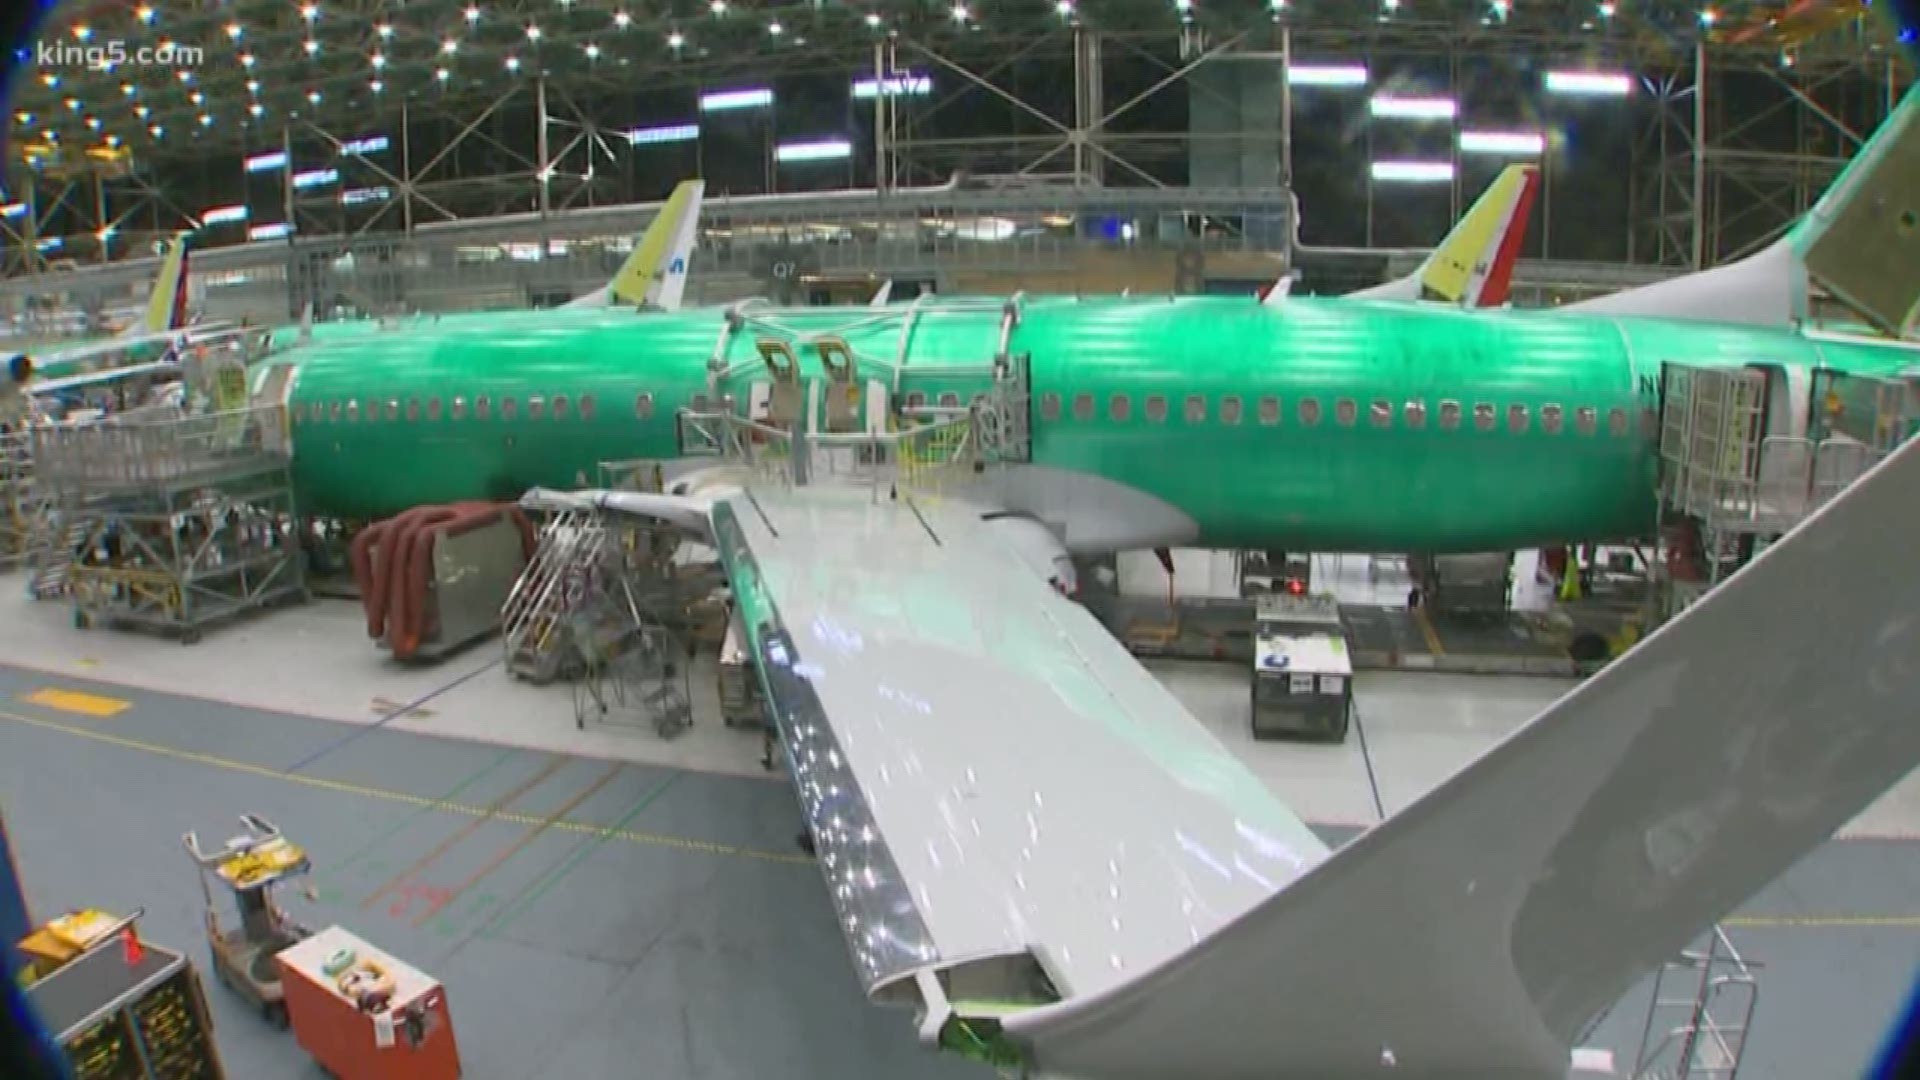 Boeing's decision to halt the production of the 737 Max could send a jolt through the U.S. economy. But is the company too big to fail?